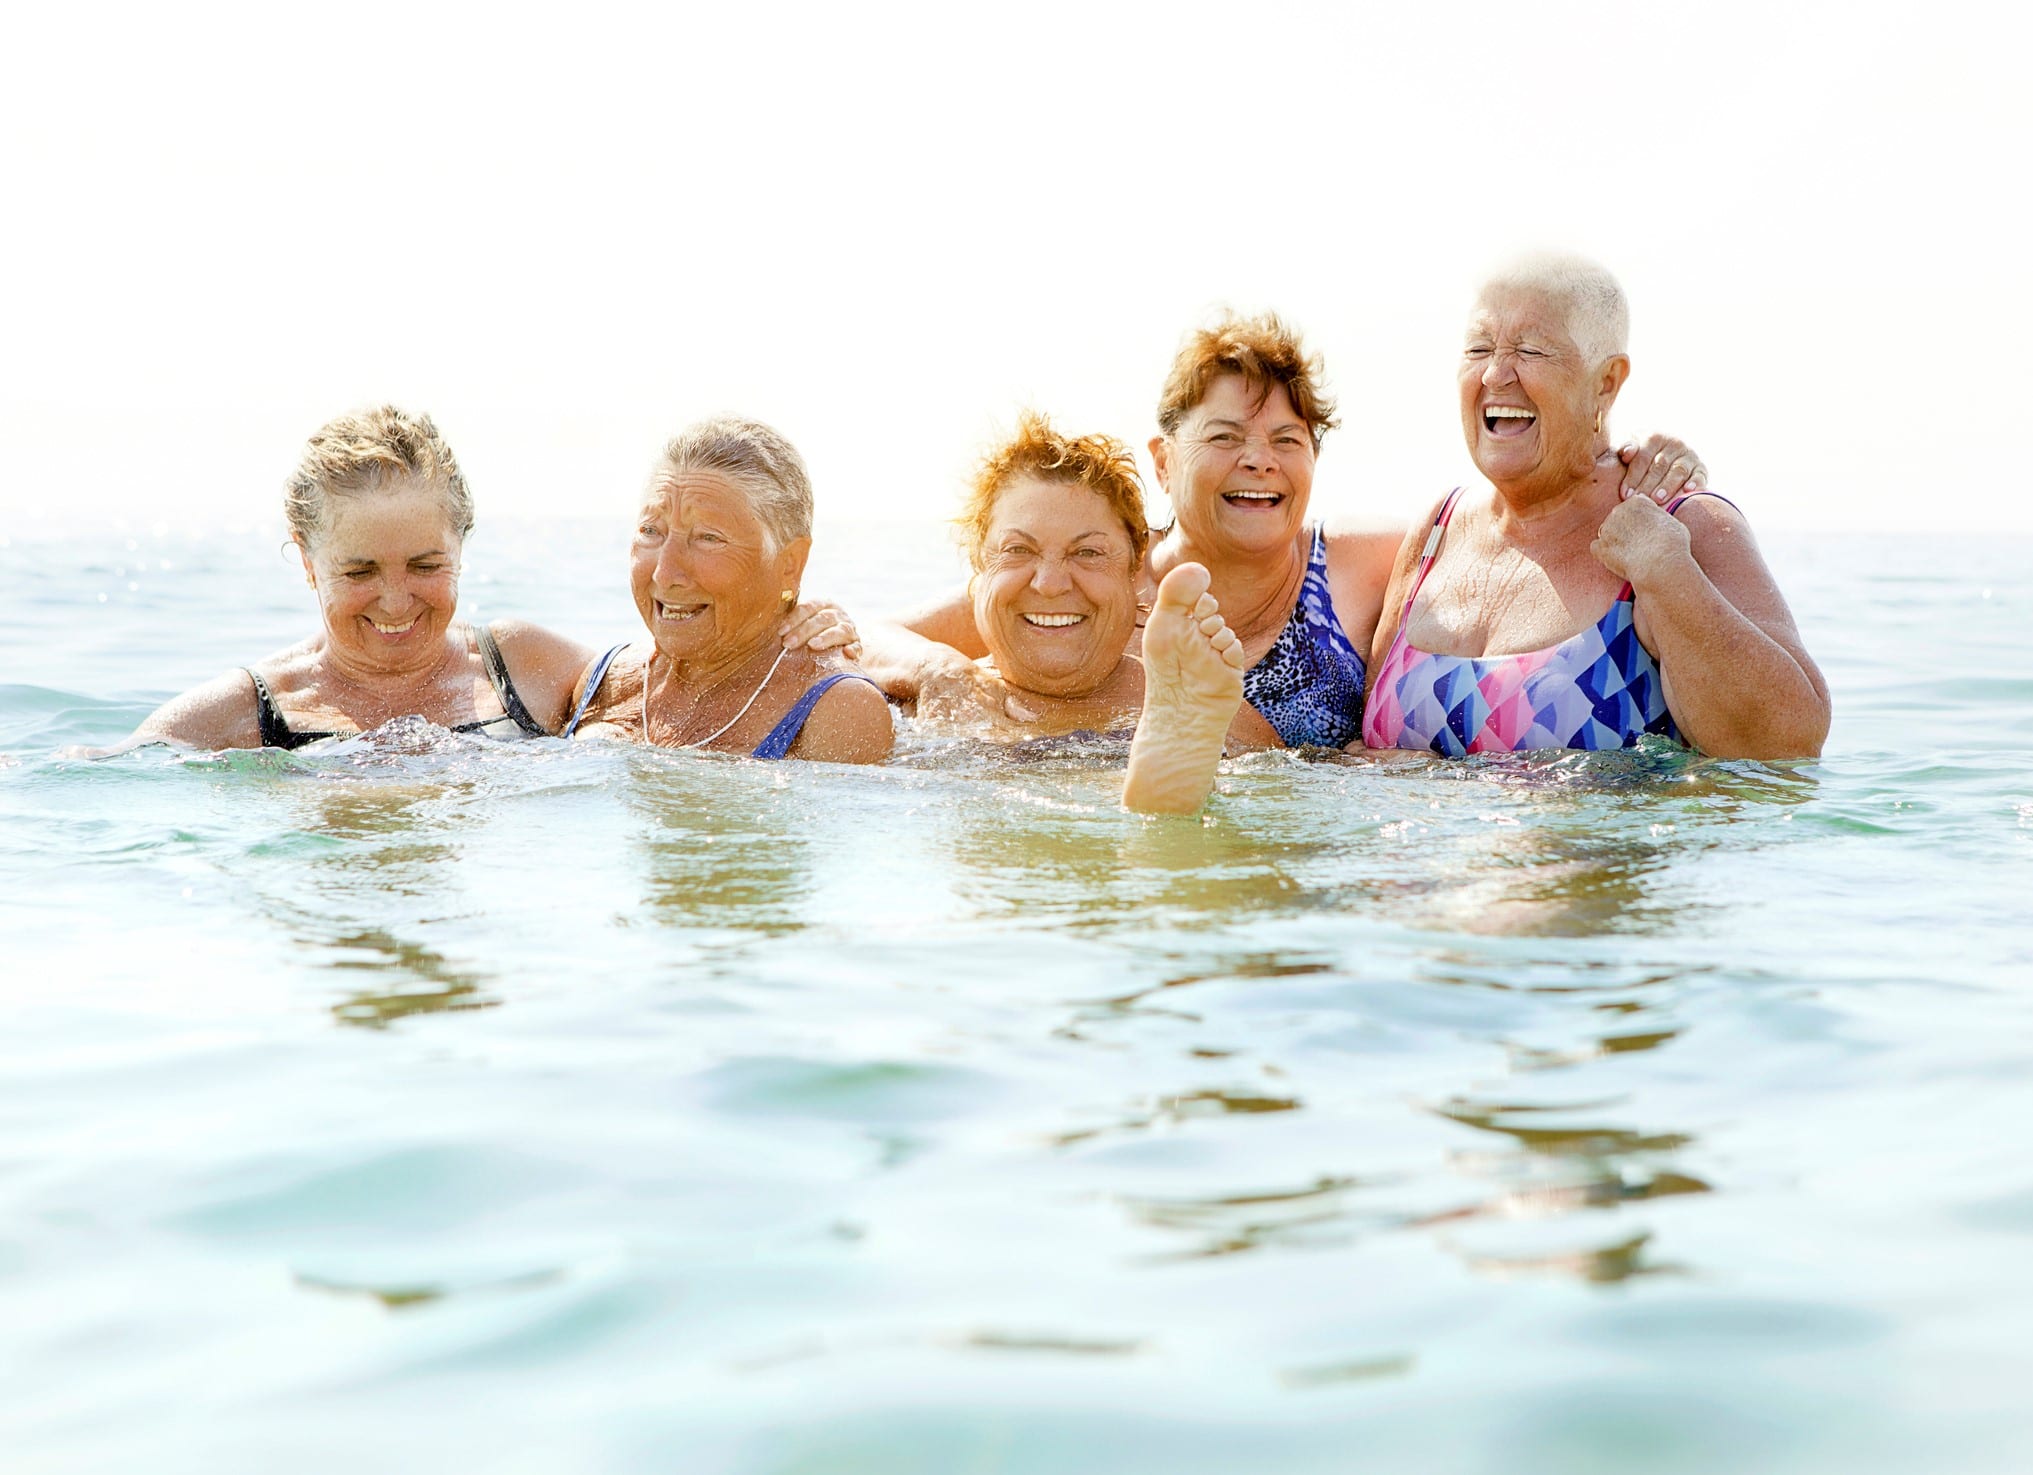 Summer Safety Tips for Seniors to Prevent Heat-Related Illness